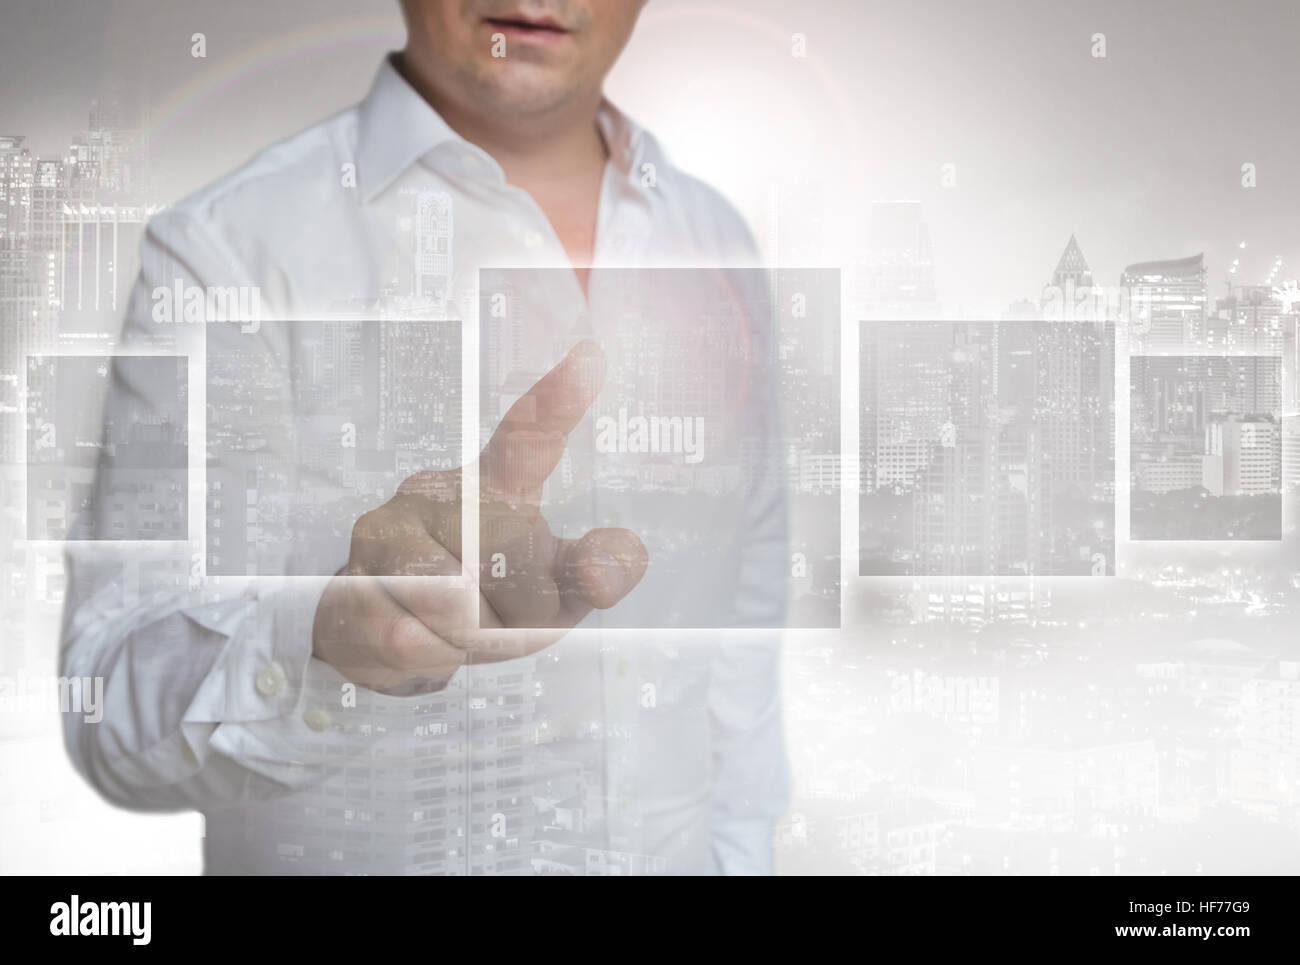 Concept touchscreen is operated by man. Stock Photo